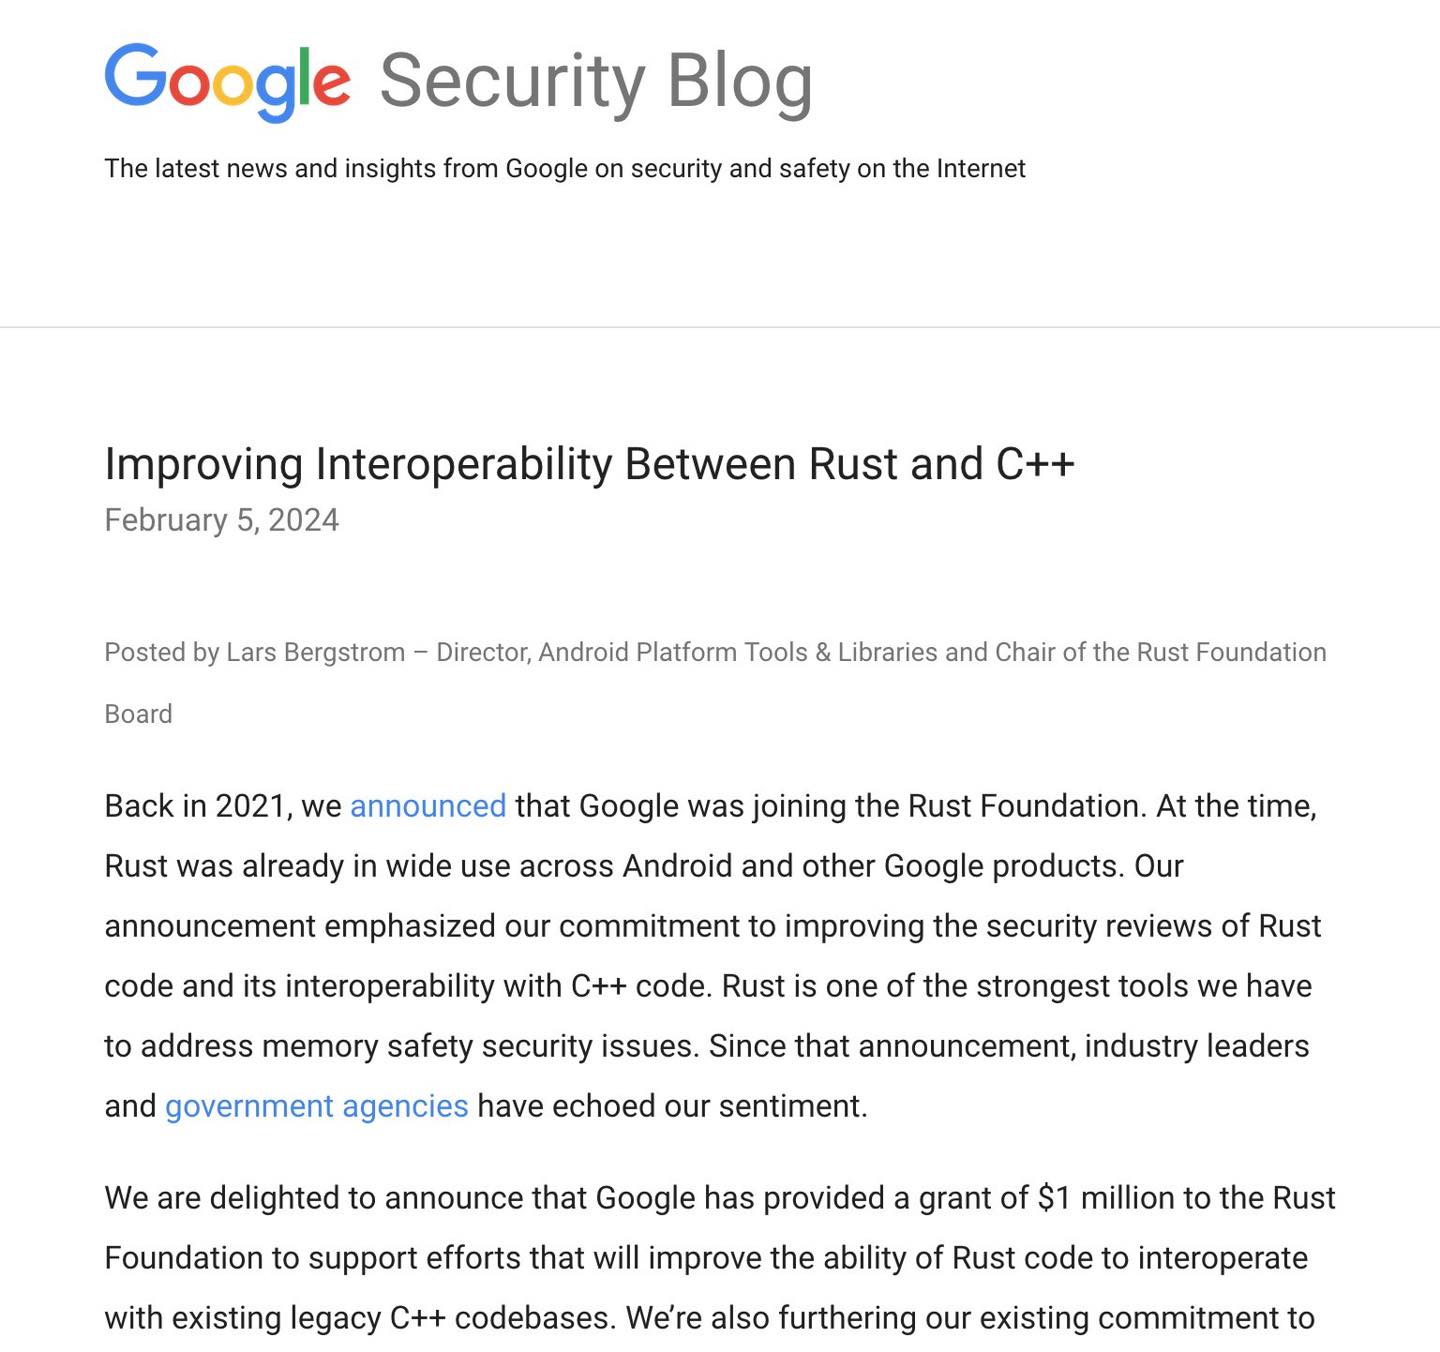 Google is donating $1M to the rust foundation to improve C++/Rust interoperability